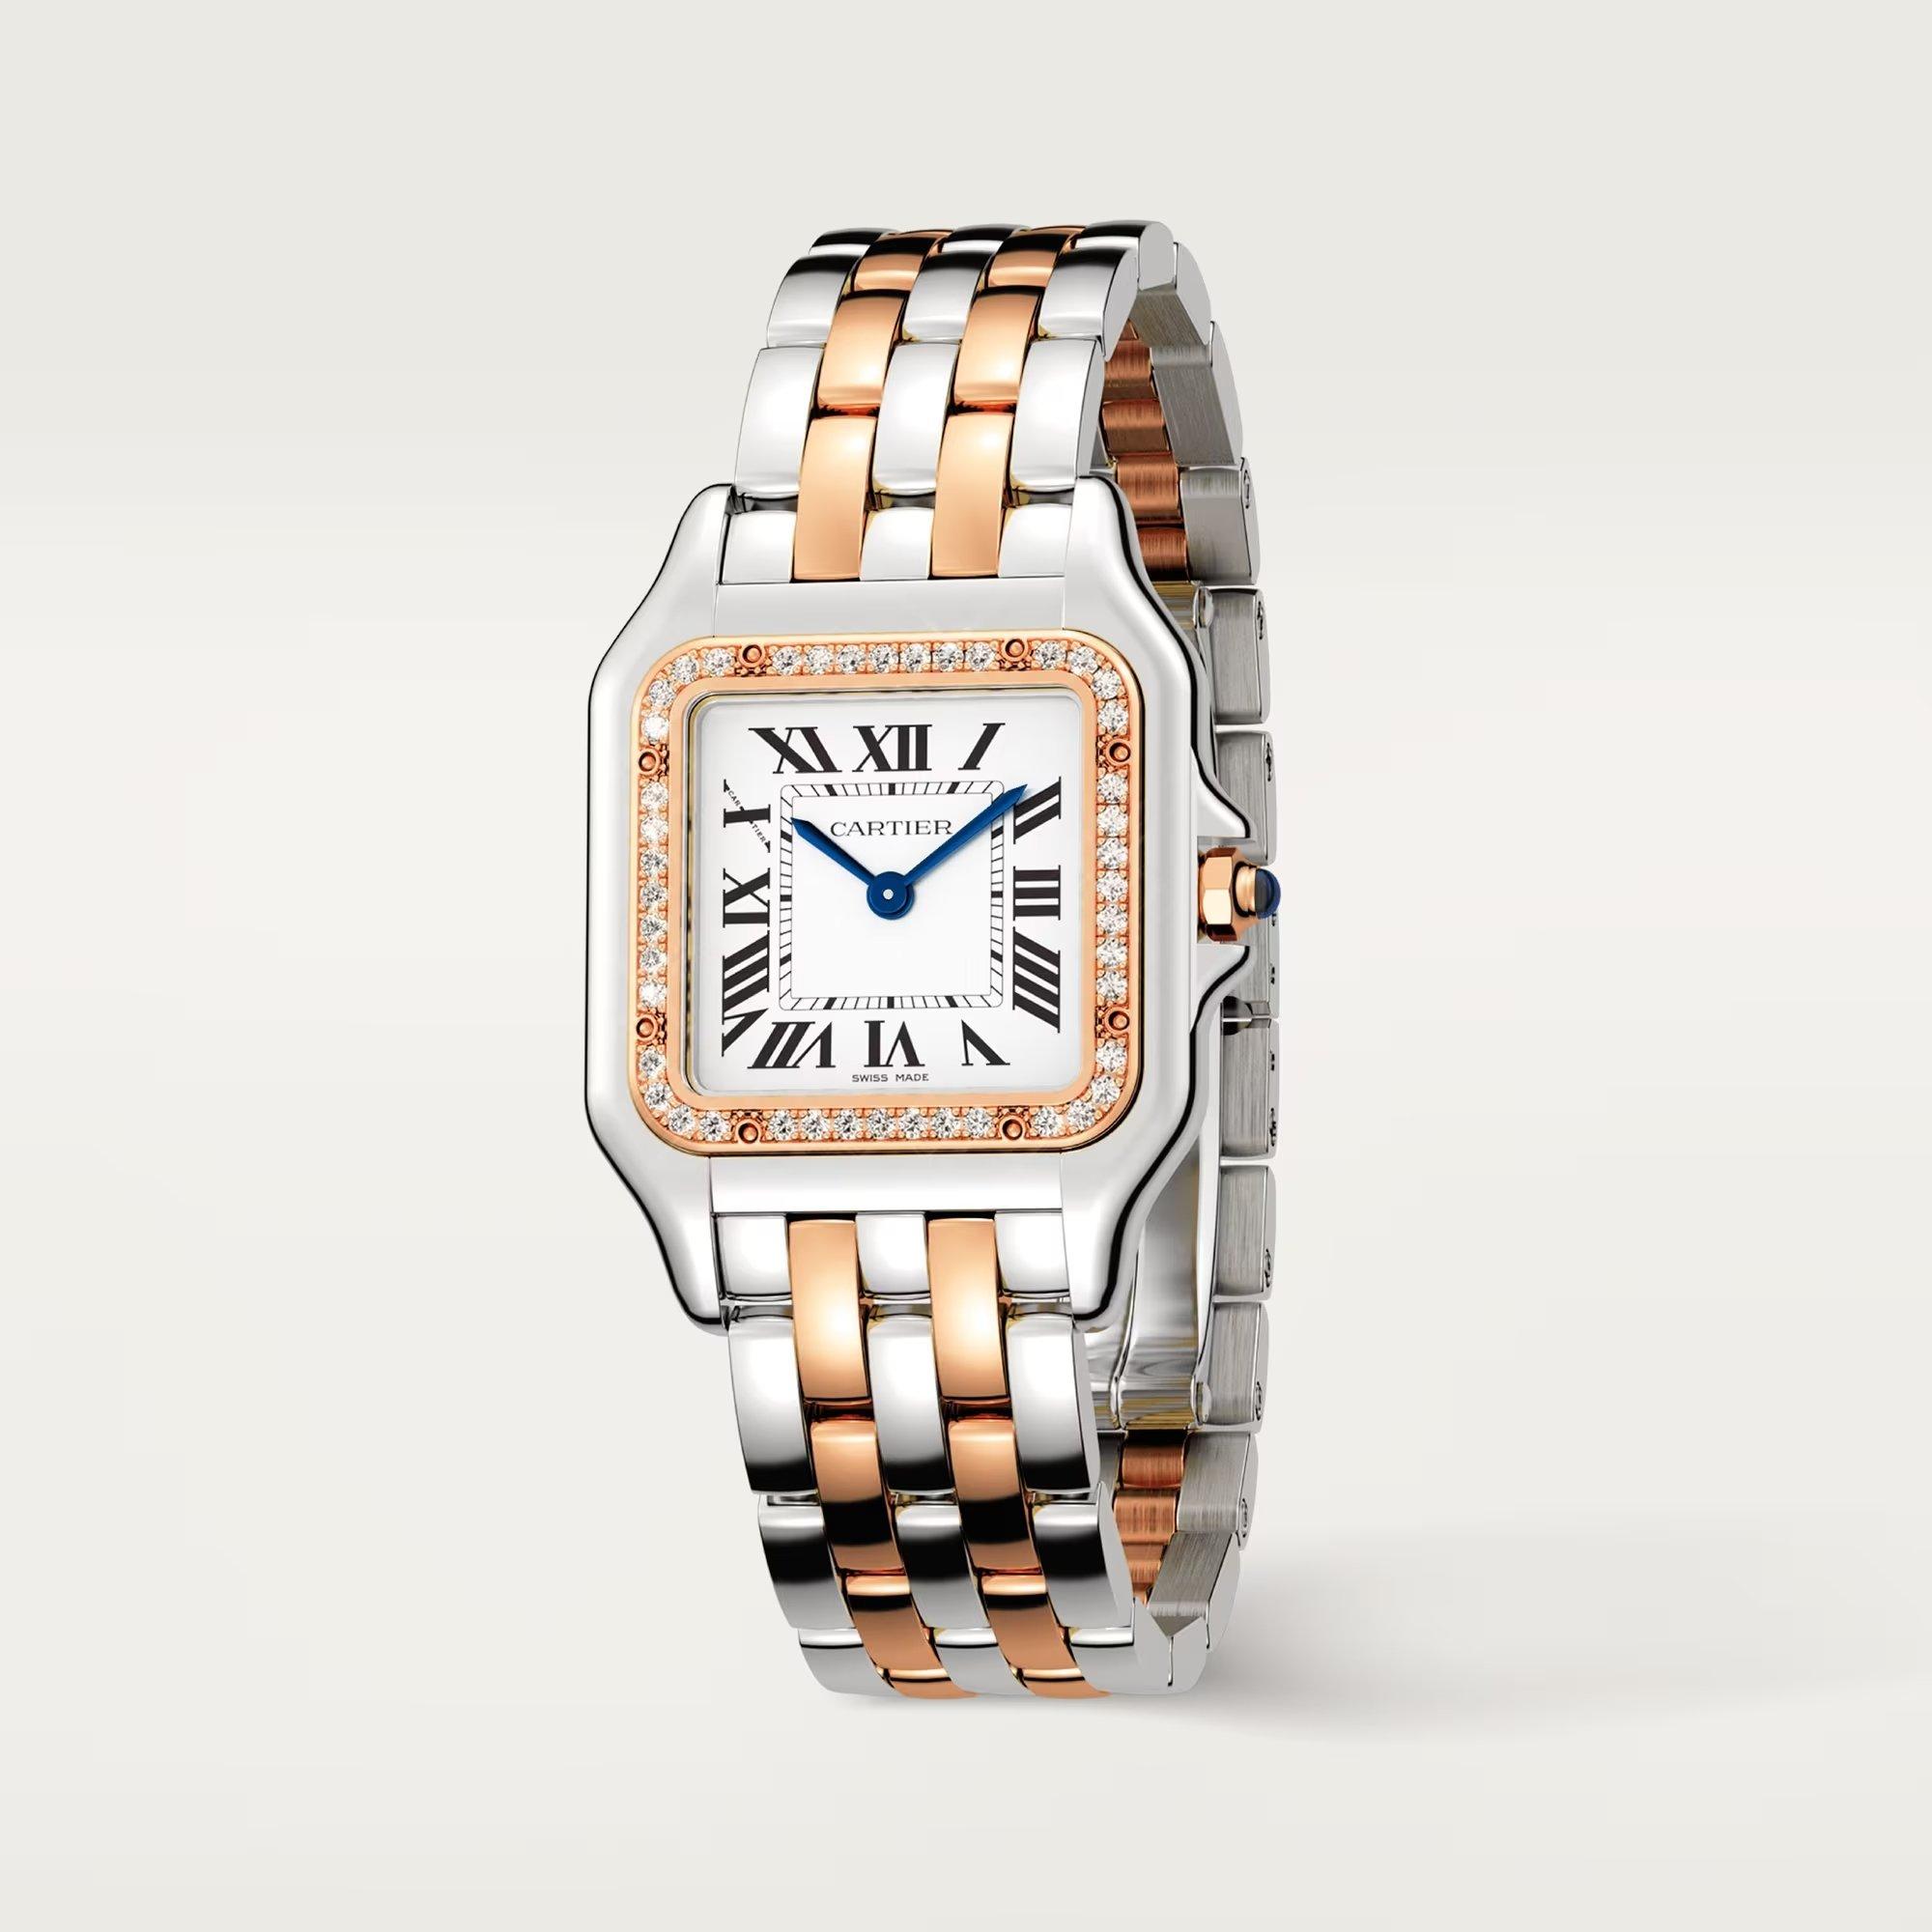 Panthere de Cartier Watch in Rose Gold with Diamonds 8